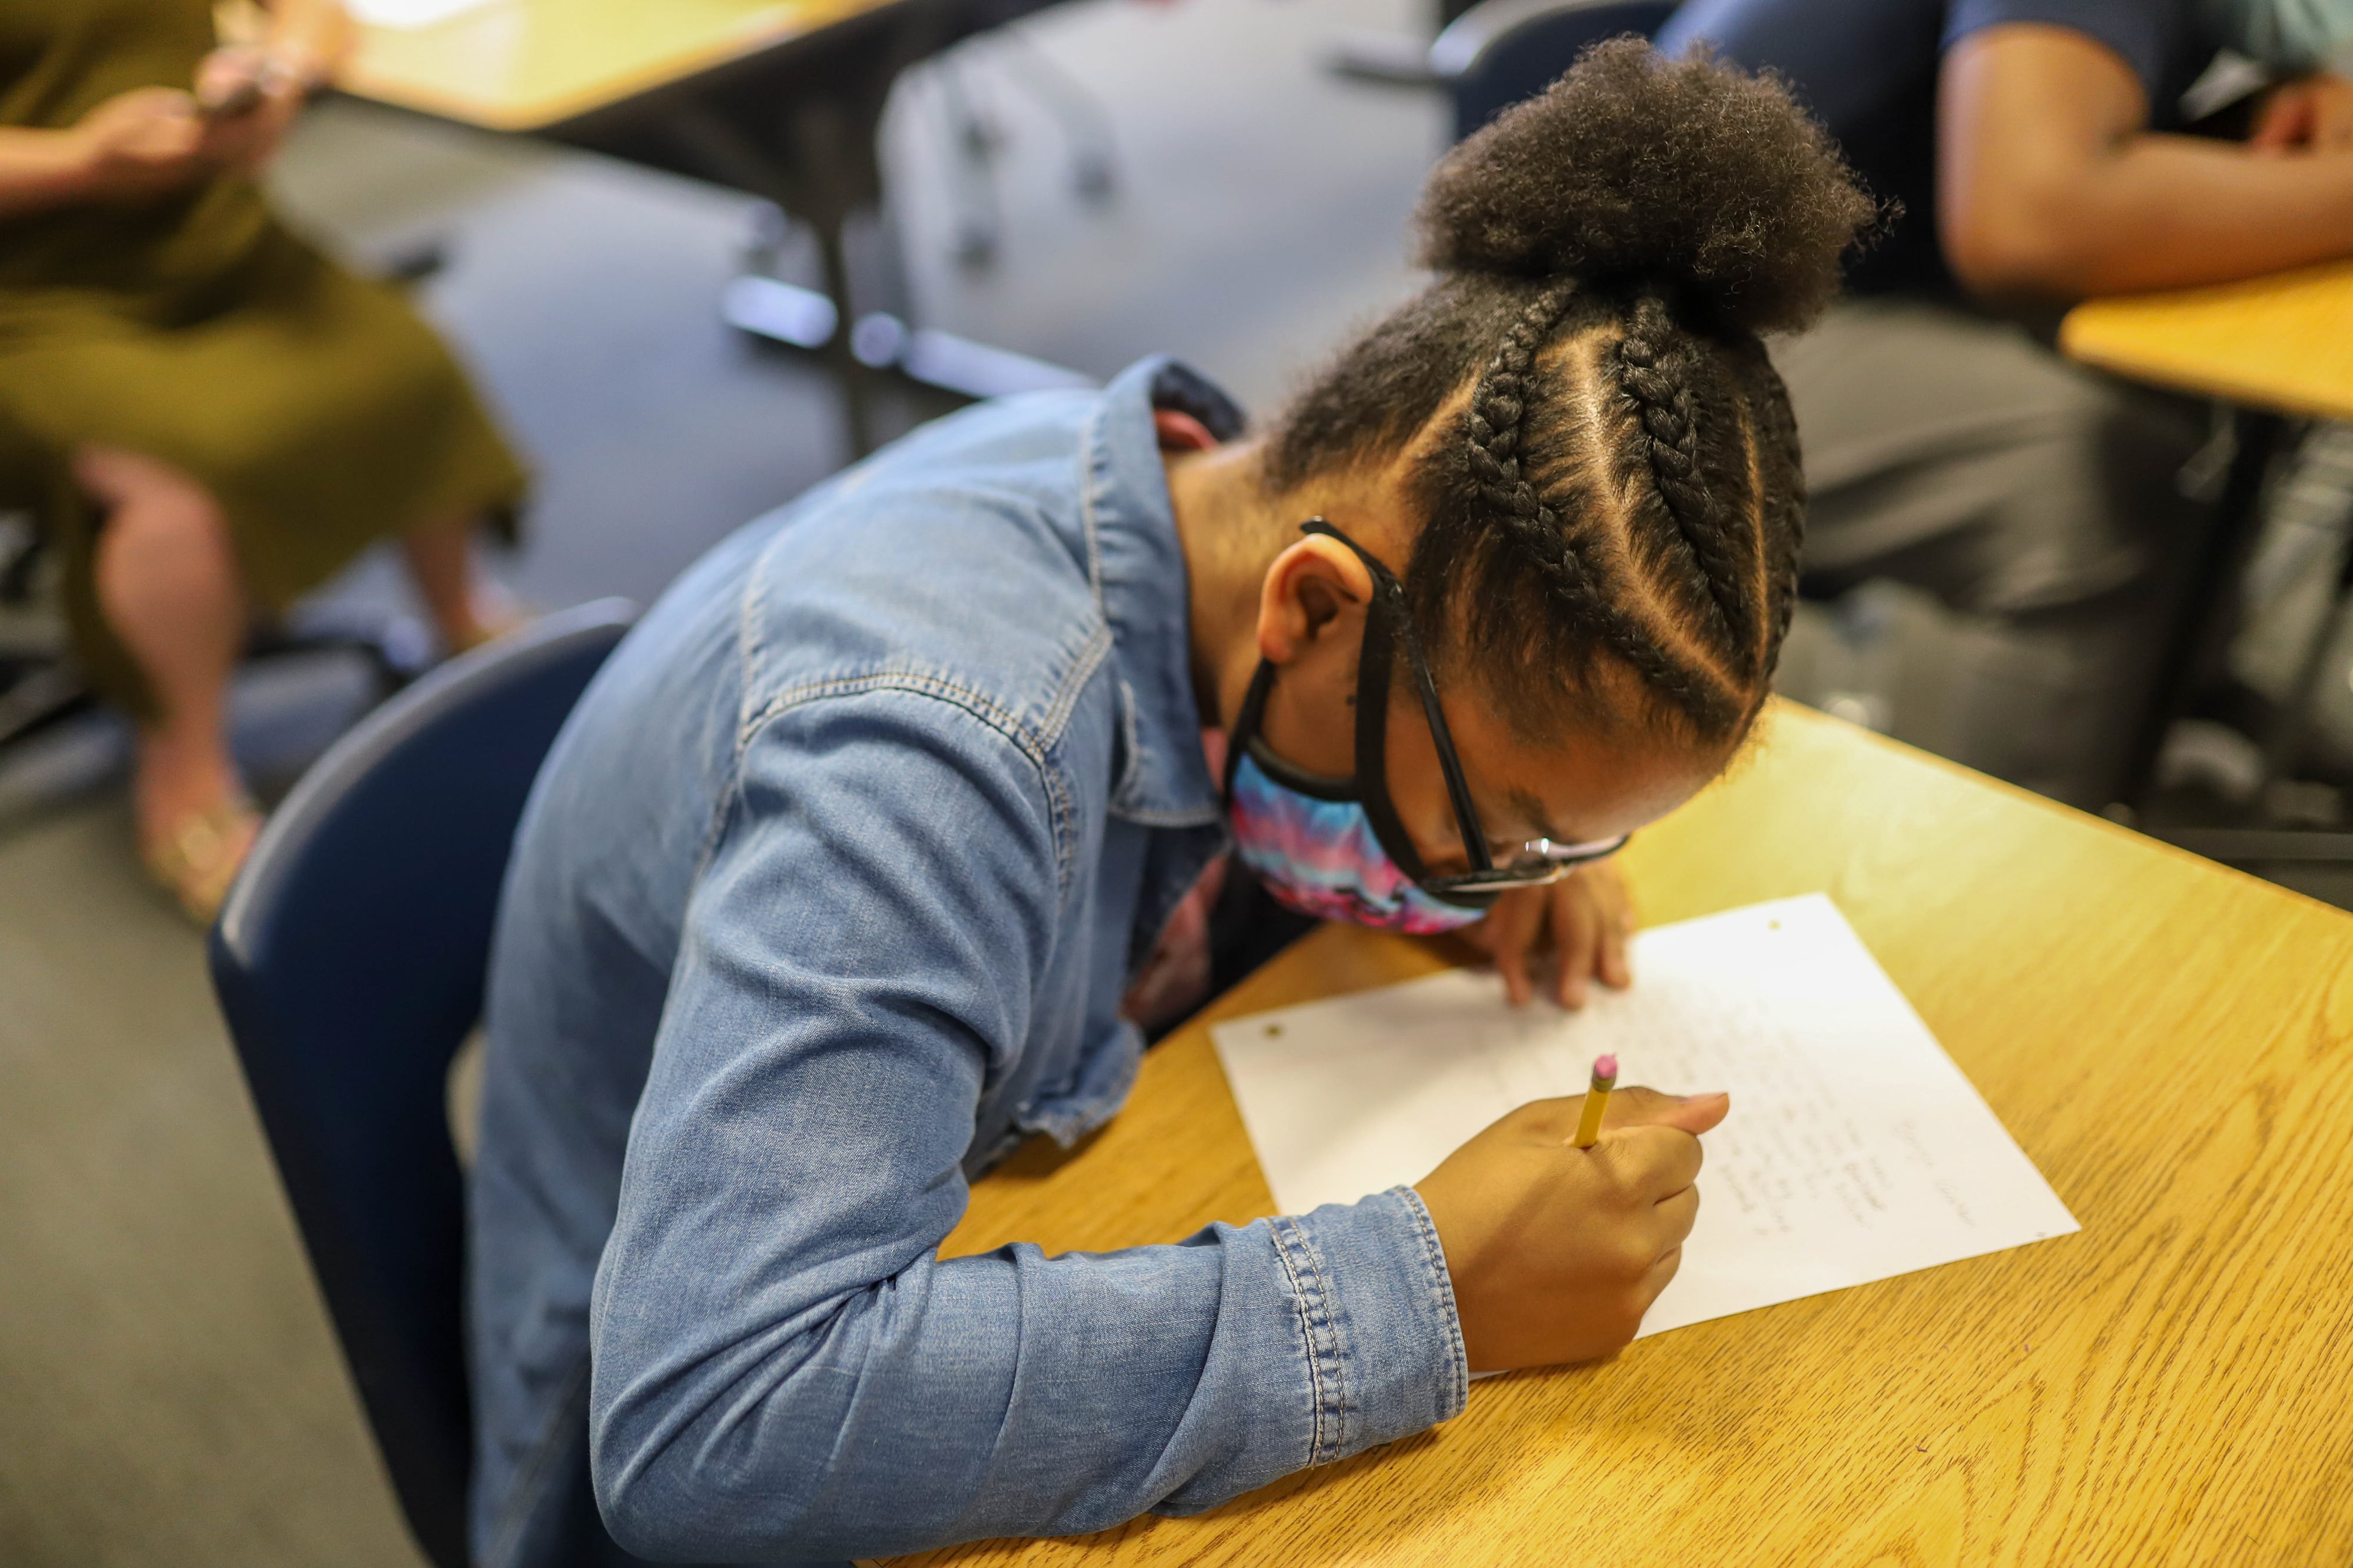 A student wearing a jean jacket and protective mask writes on a piece of notebook paper at her desk.